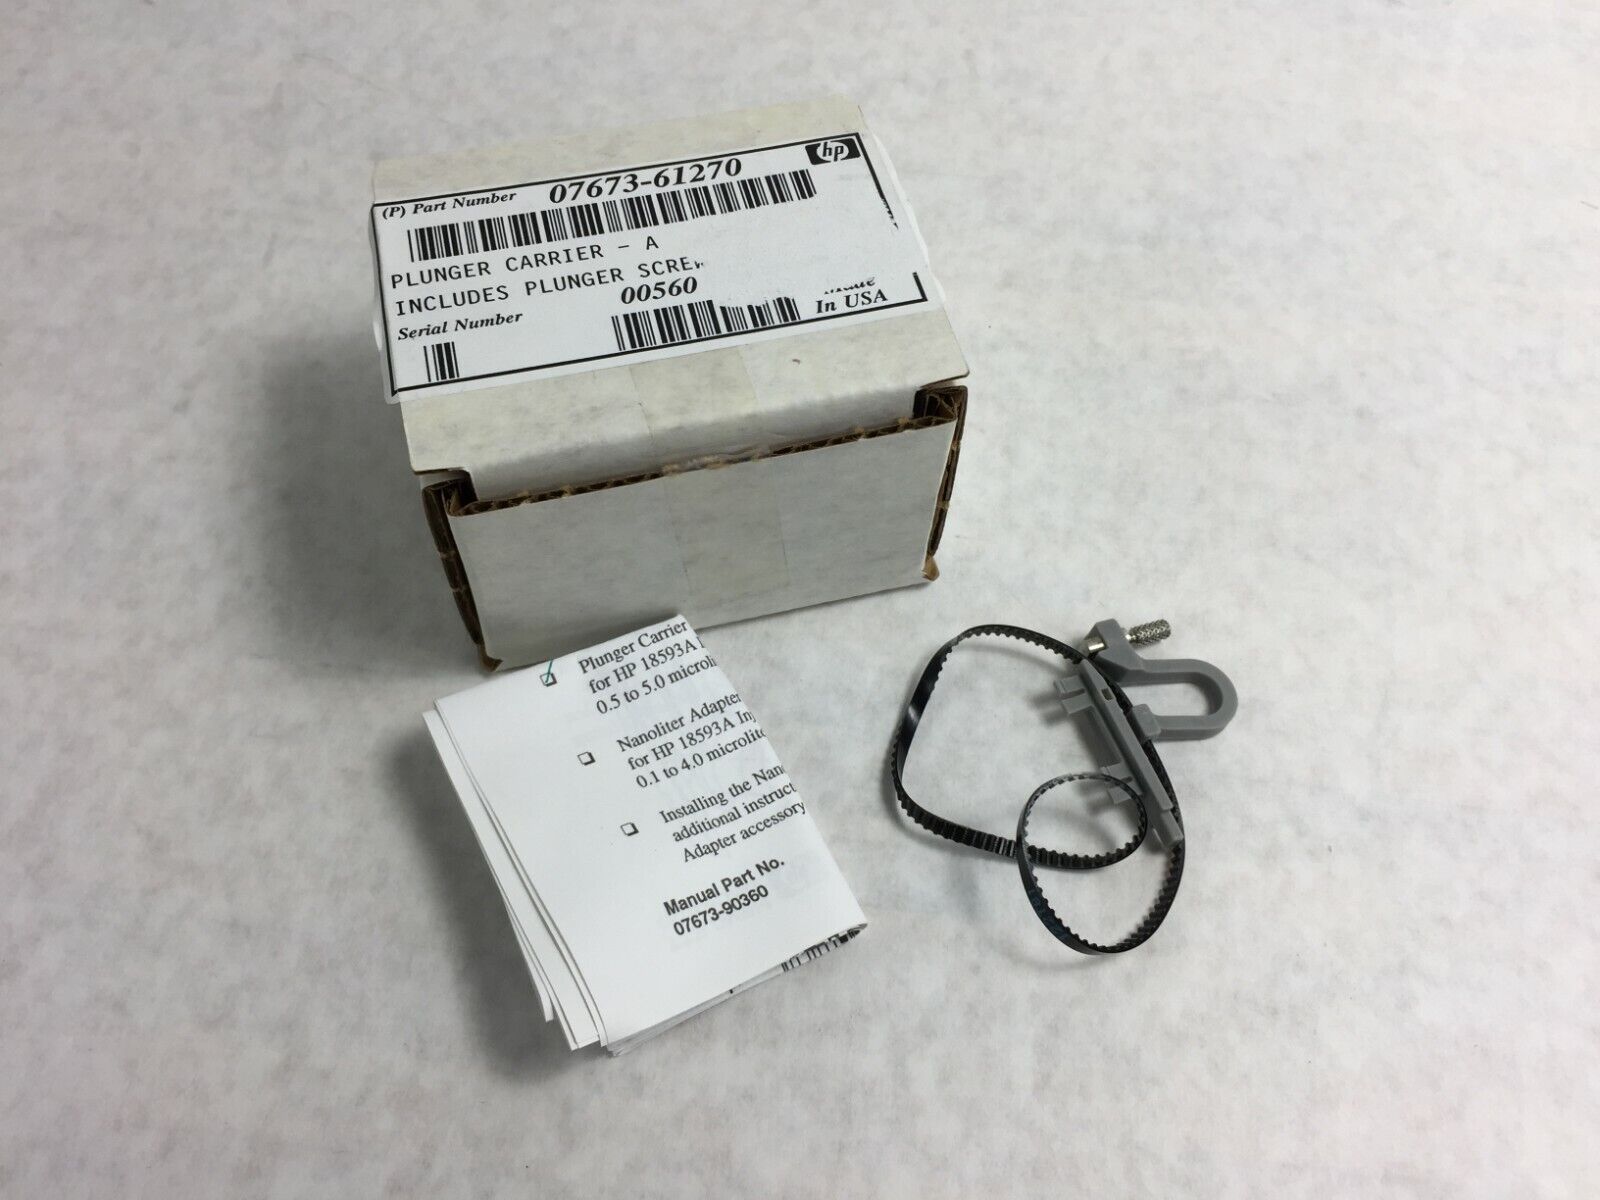 Agilent hp Plunger Carrier A Includes Plunger Screw  07673-61270  NIB